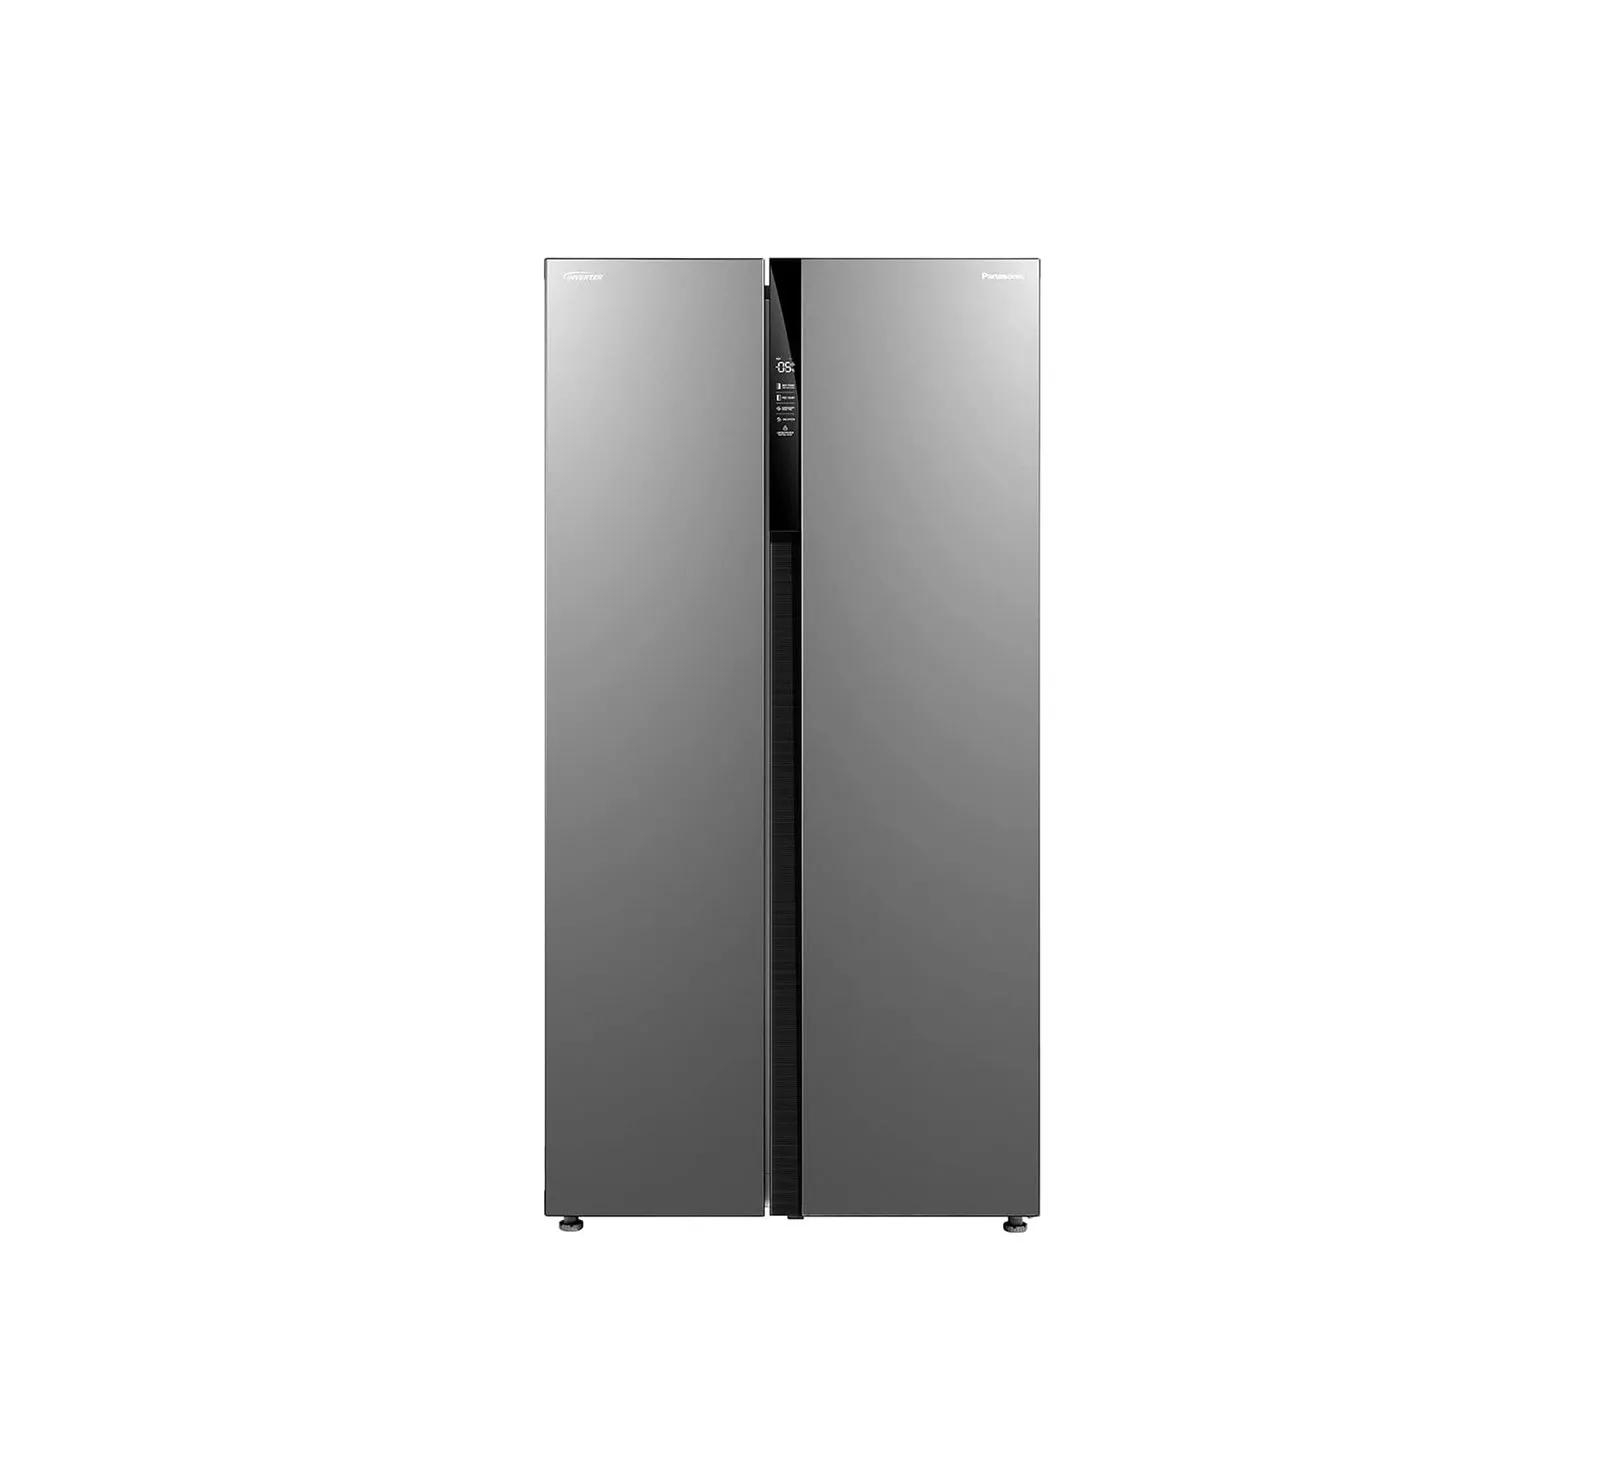 Panasonic 700 Liter Side By Side Refrigerator Stainless Steel Finish Model NRBS703MS | 1 Year Full 10 Year Compressor Warranty.